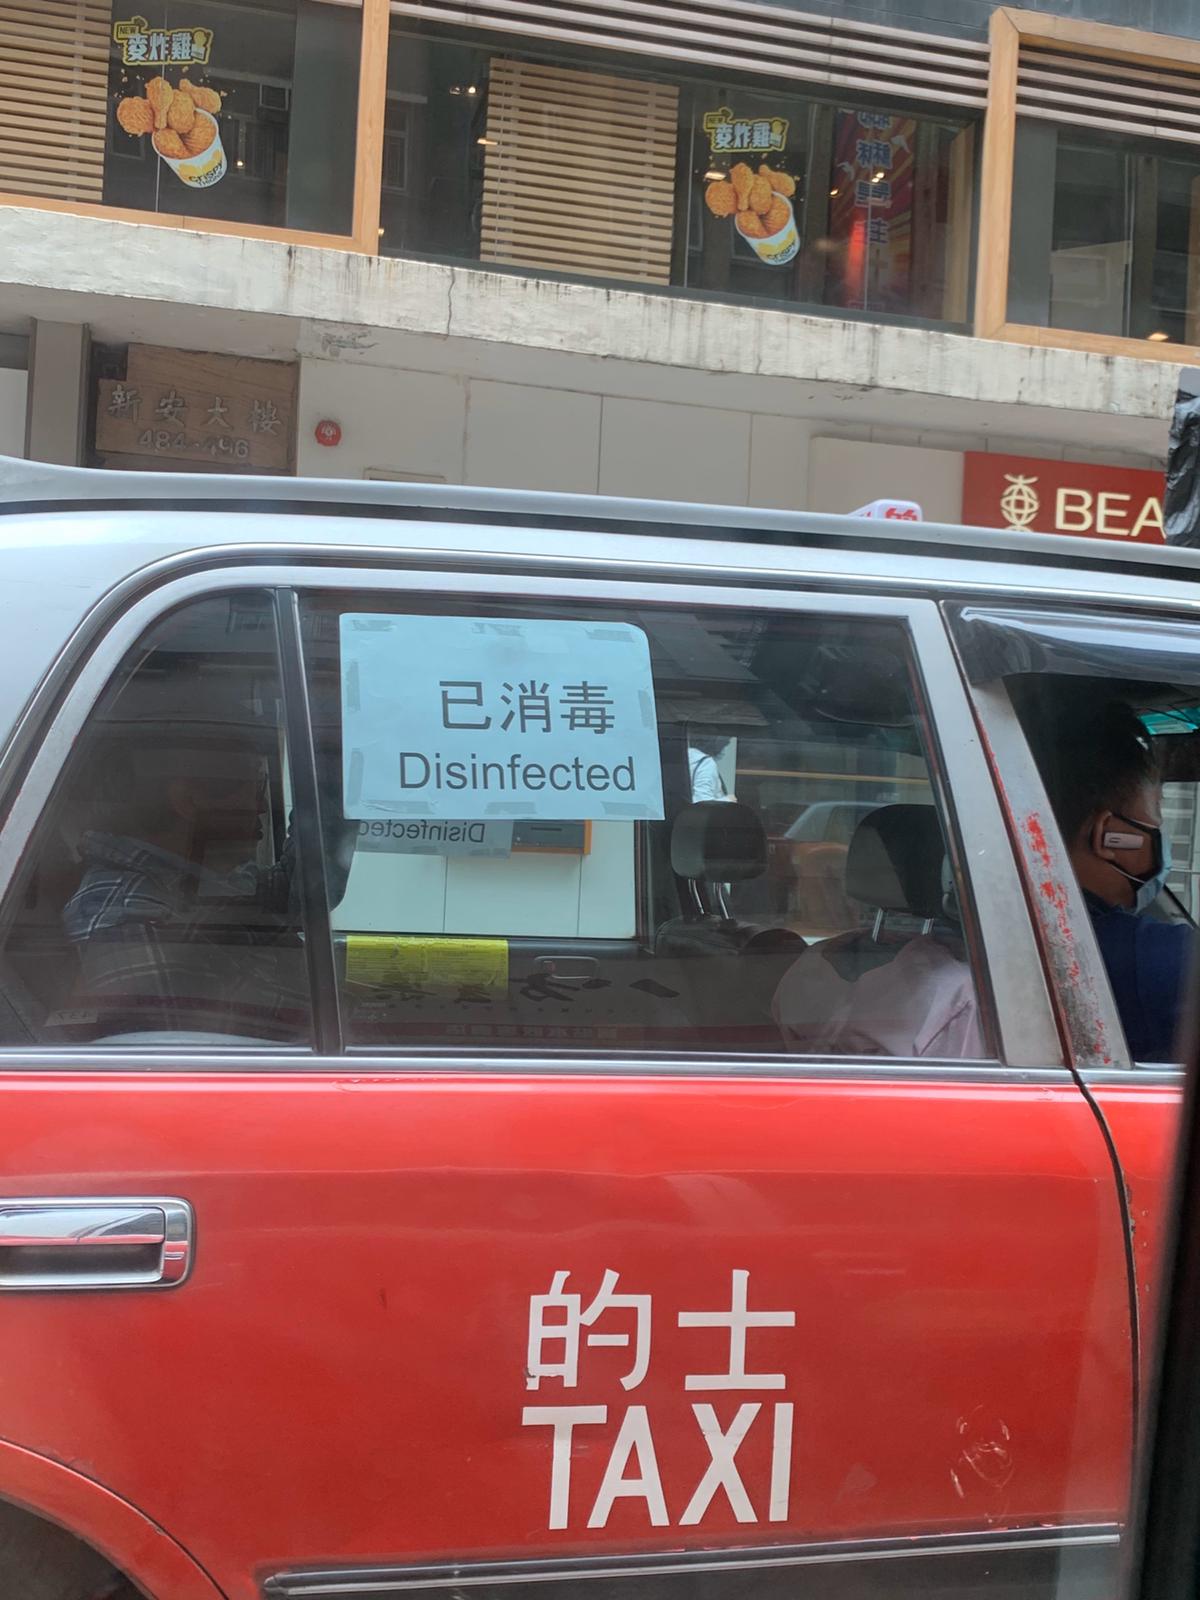 An image depicting a disinfected taxi